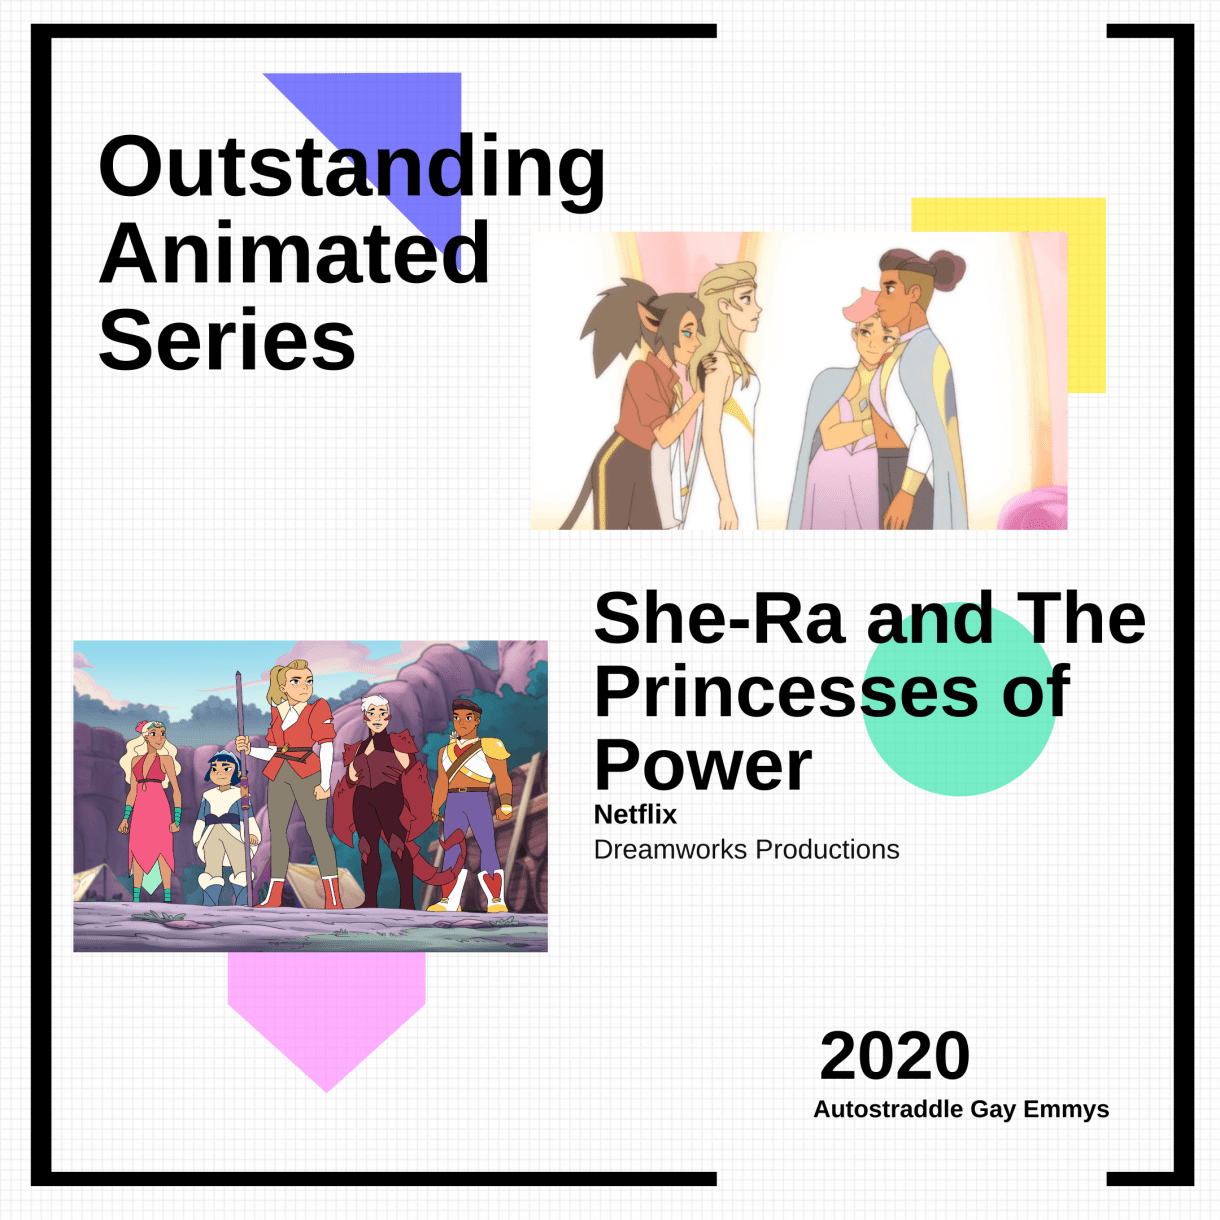 Outstanding Animated Series: She-Ra and the Princesses of Power (Netflix)